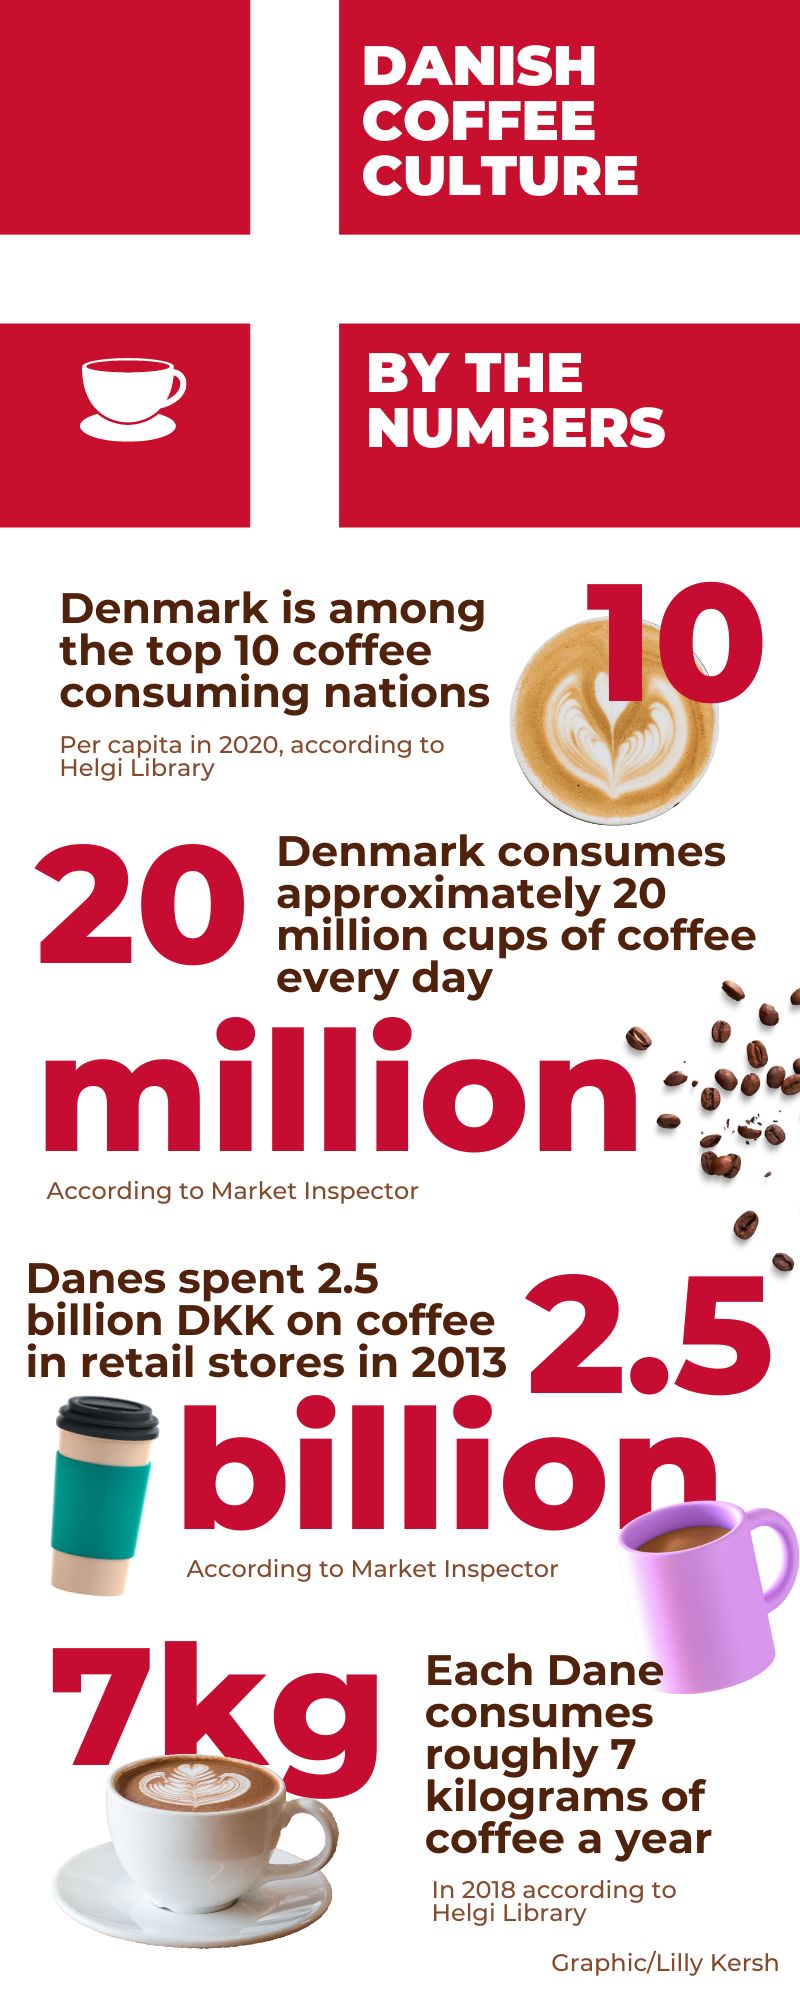 An Infographic explaining coffee culture in Denmark.